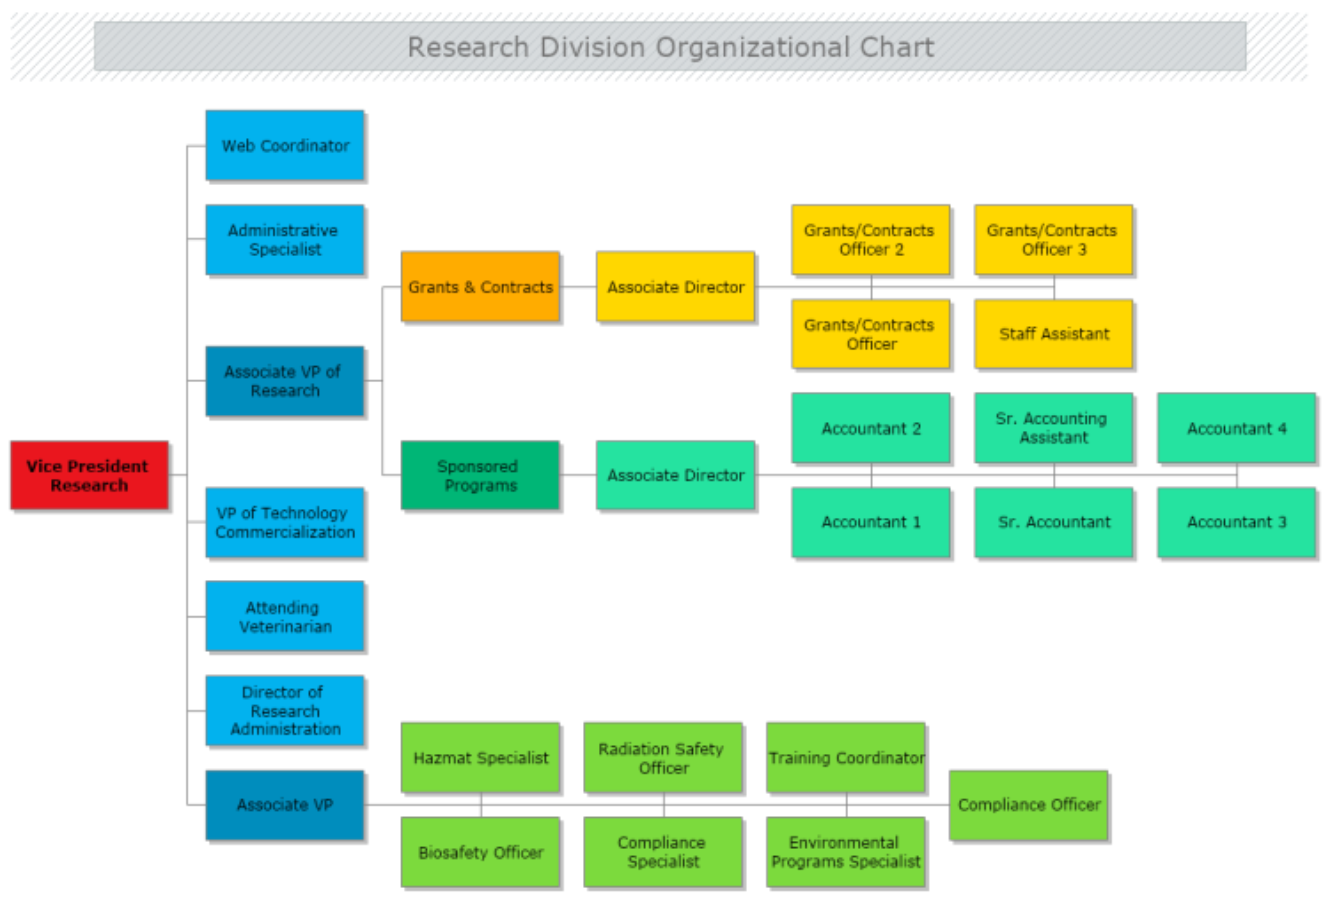 Research Division Organizational Chart